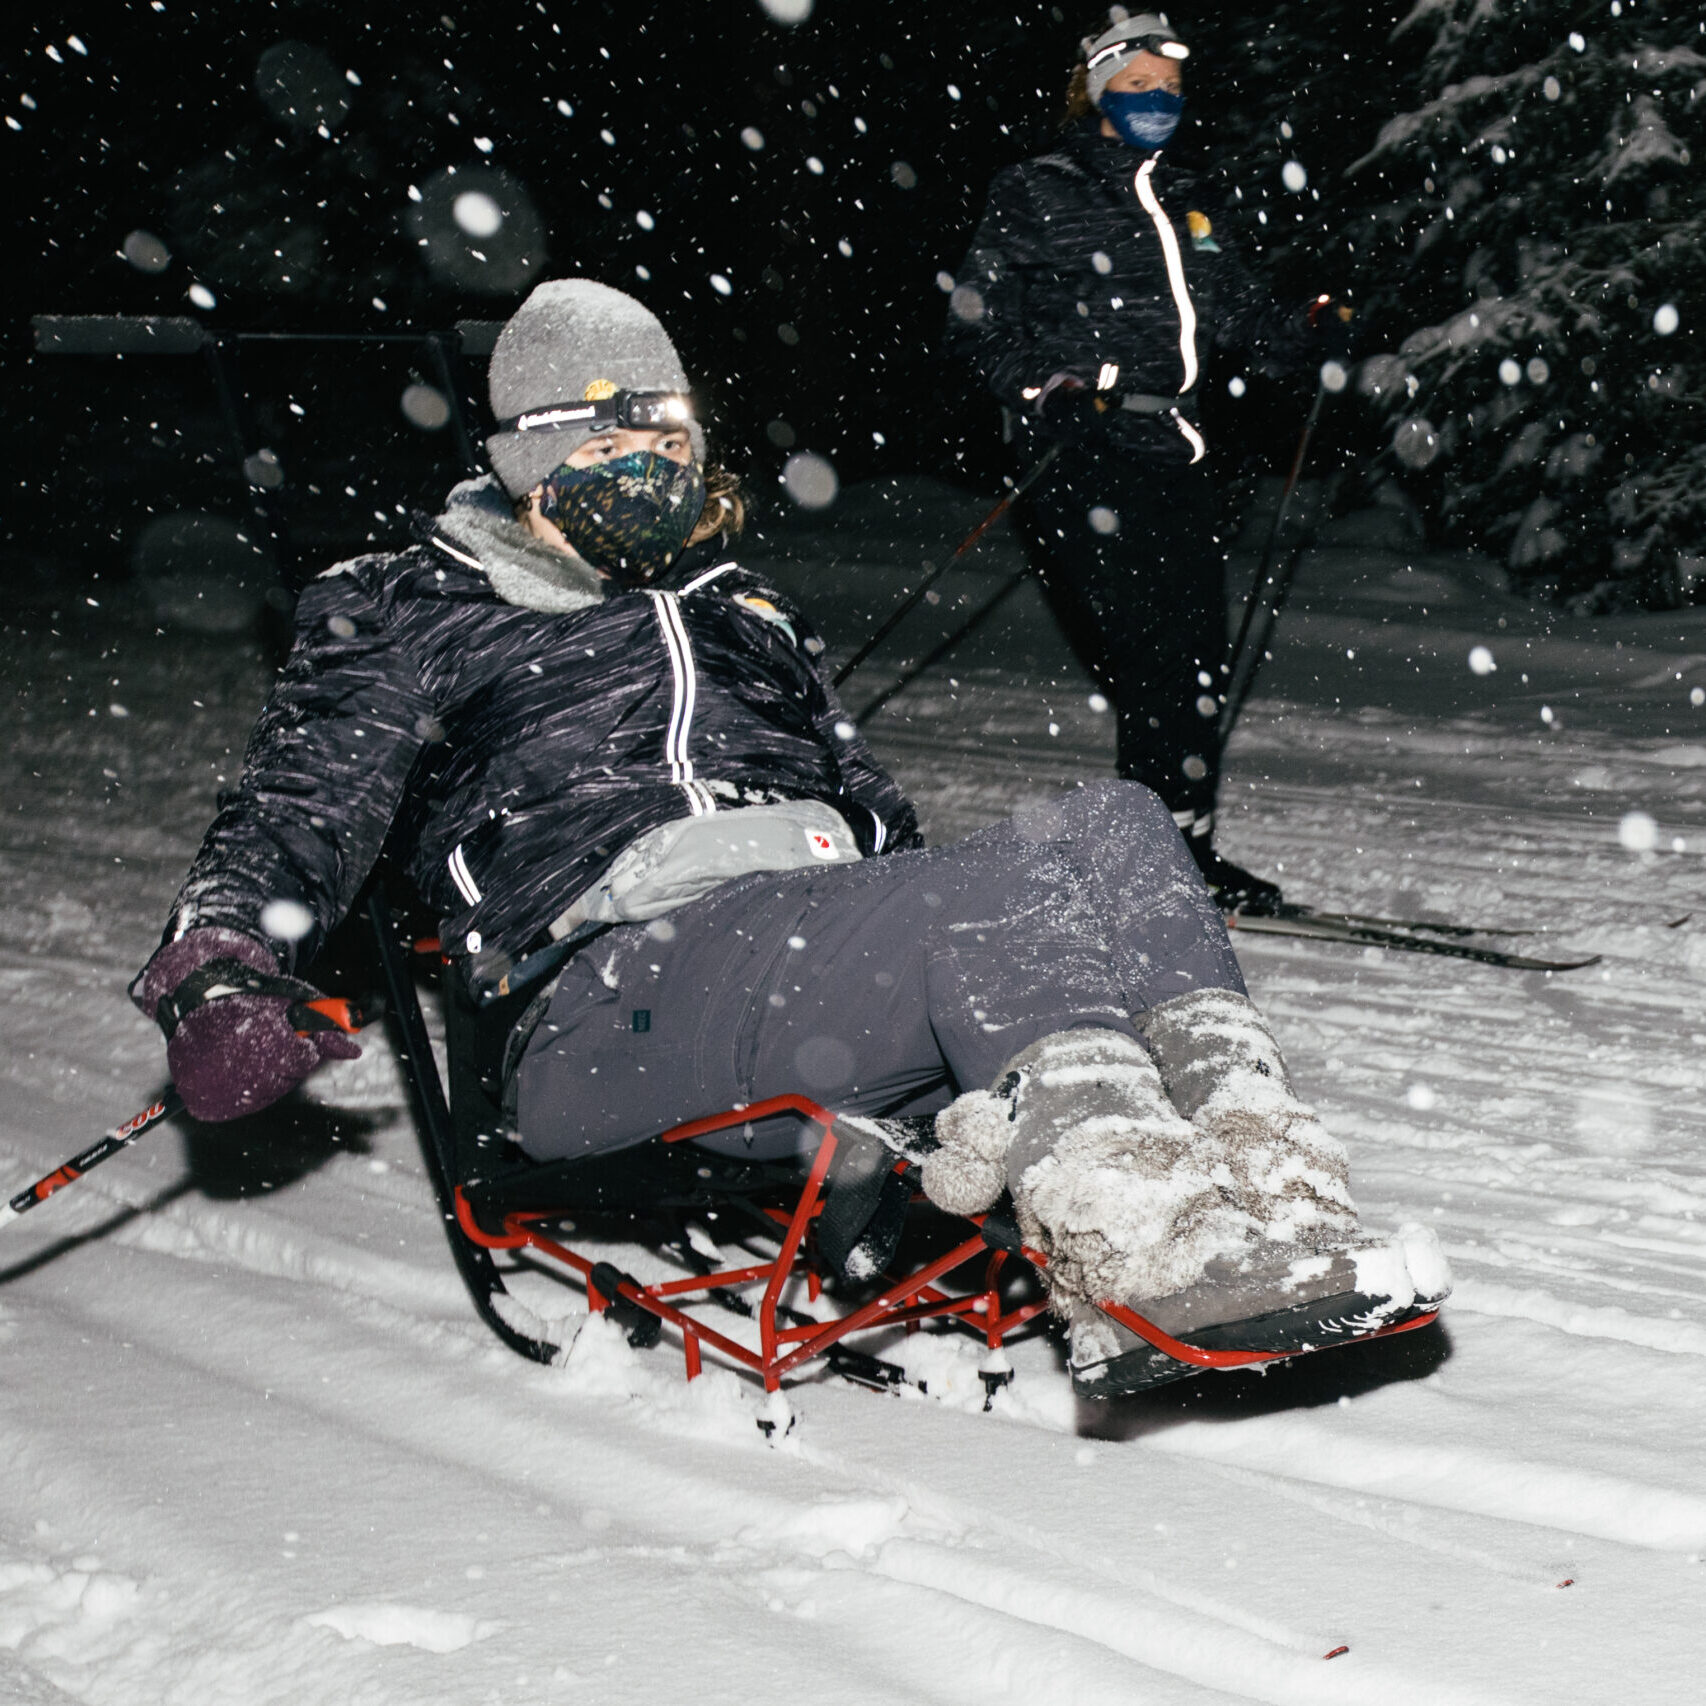 A woman using s nordic sit-ski at night during a snowstorm at night.